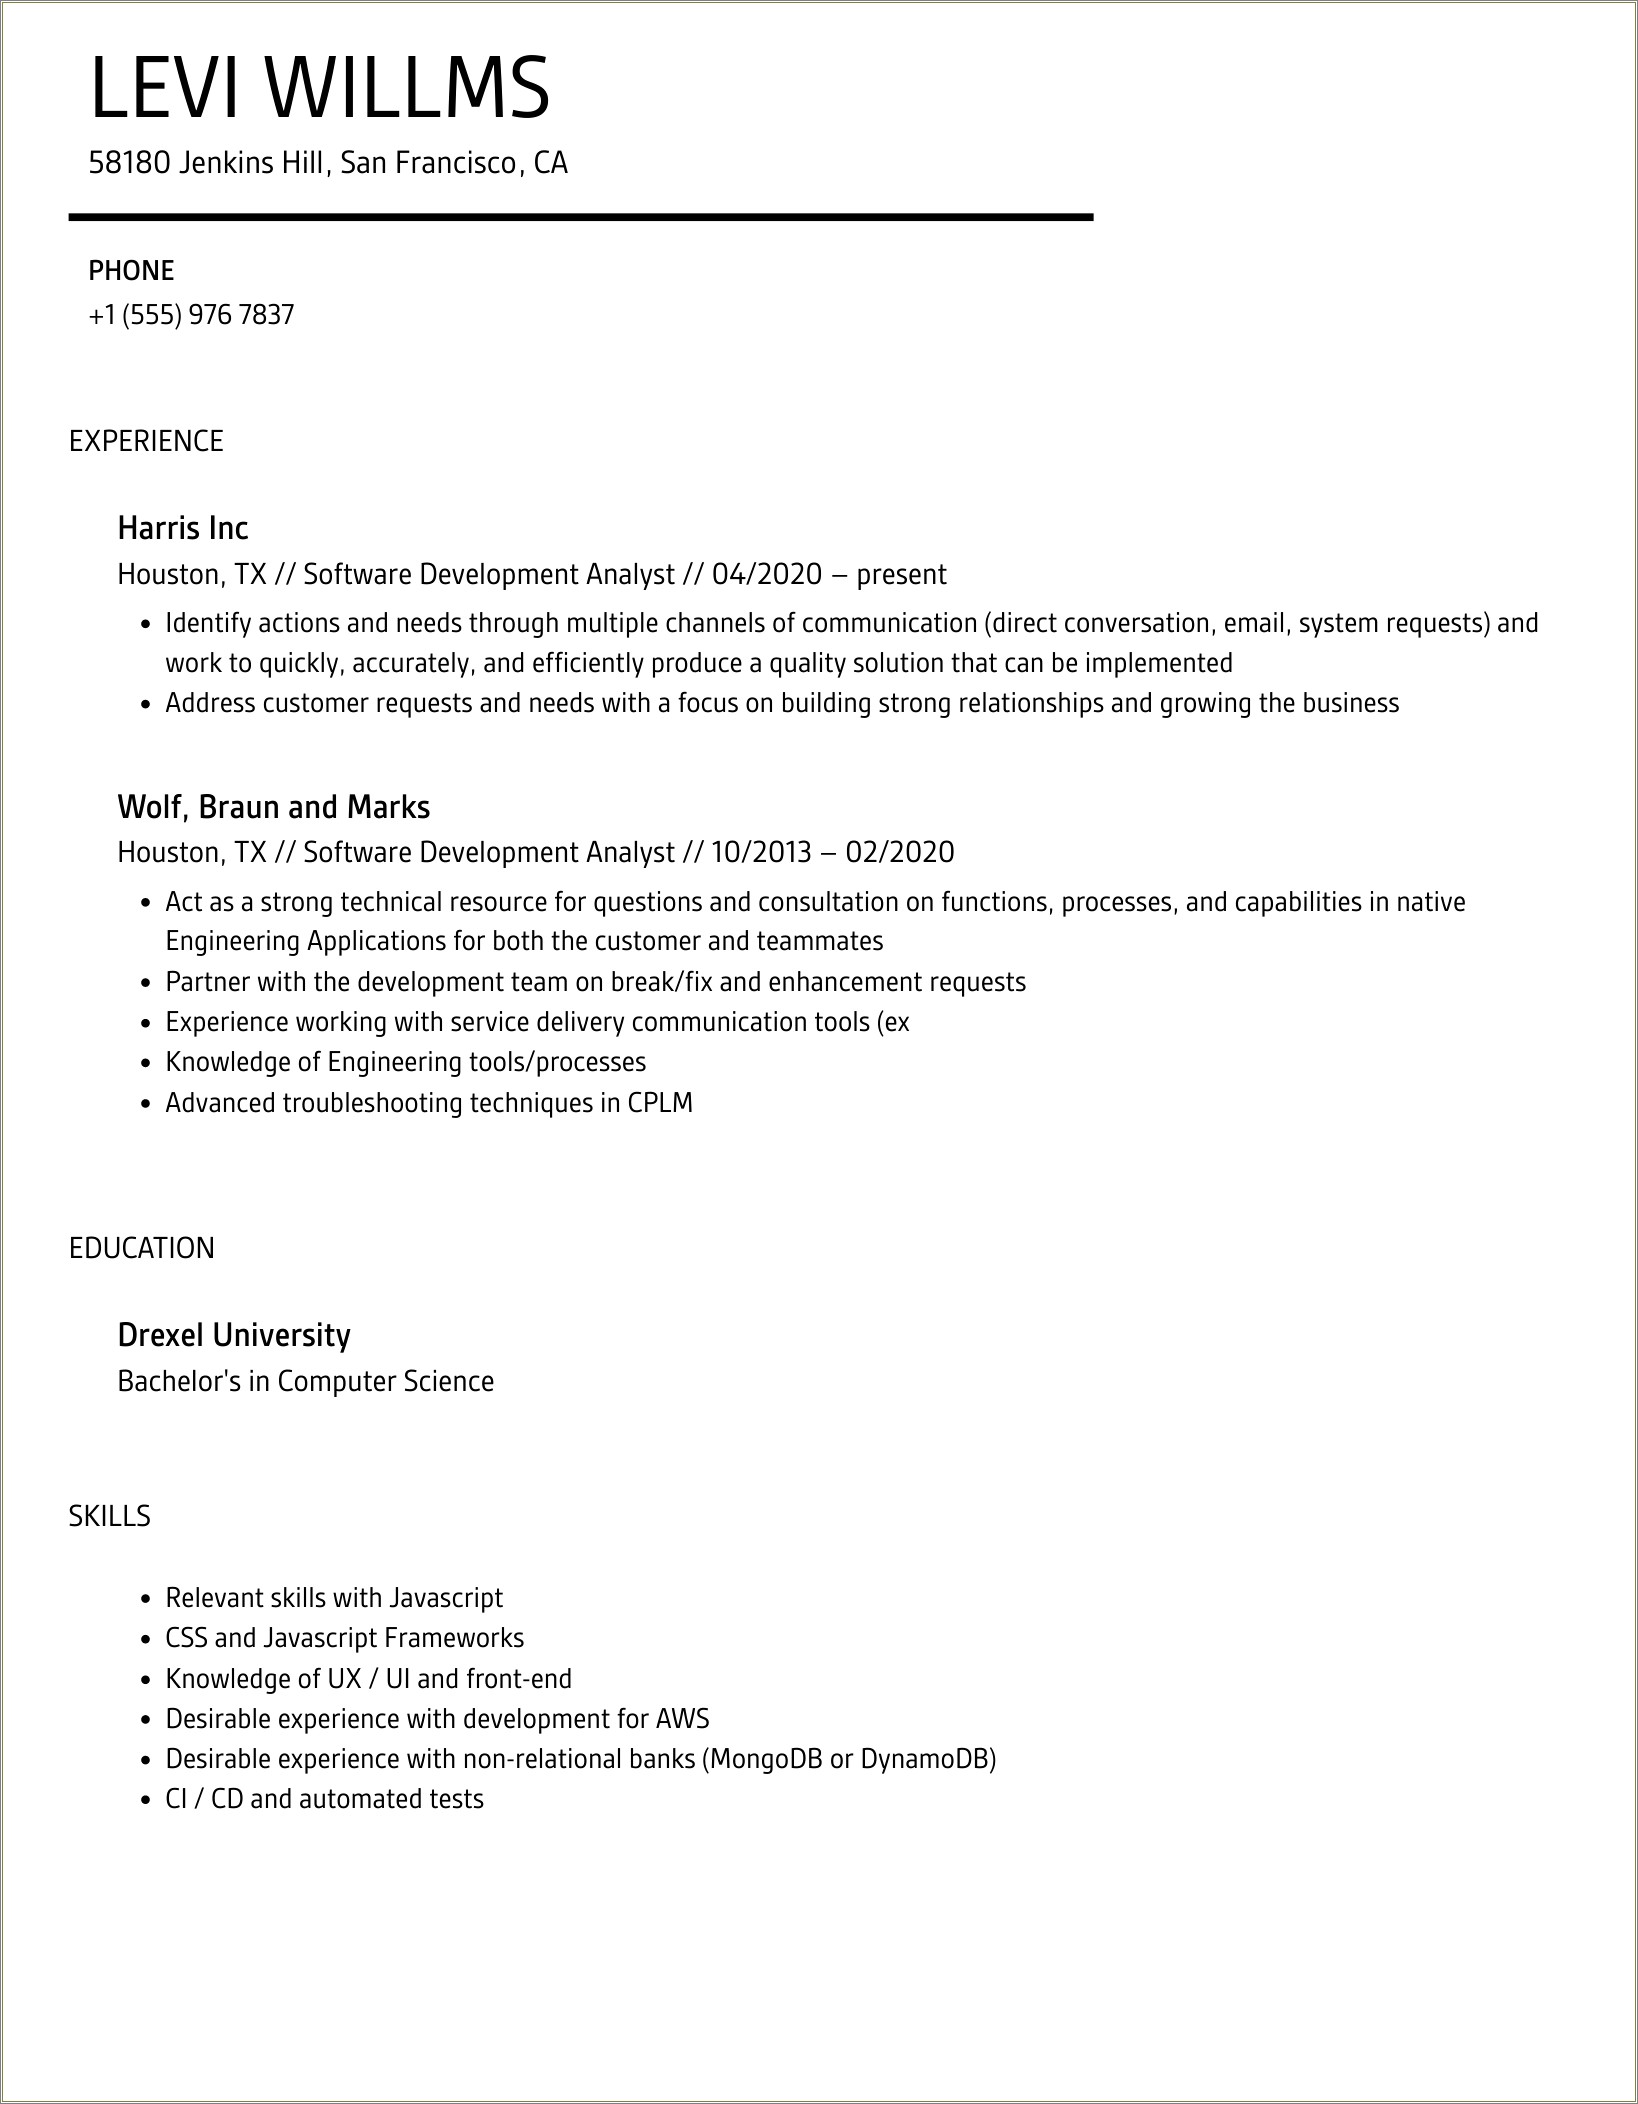 Full Development Life Cycle Experience Resume